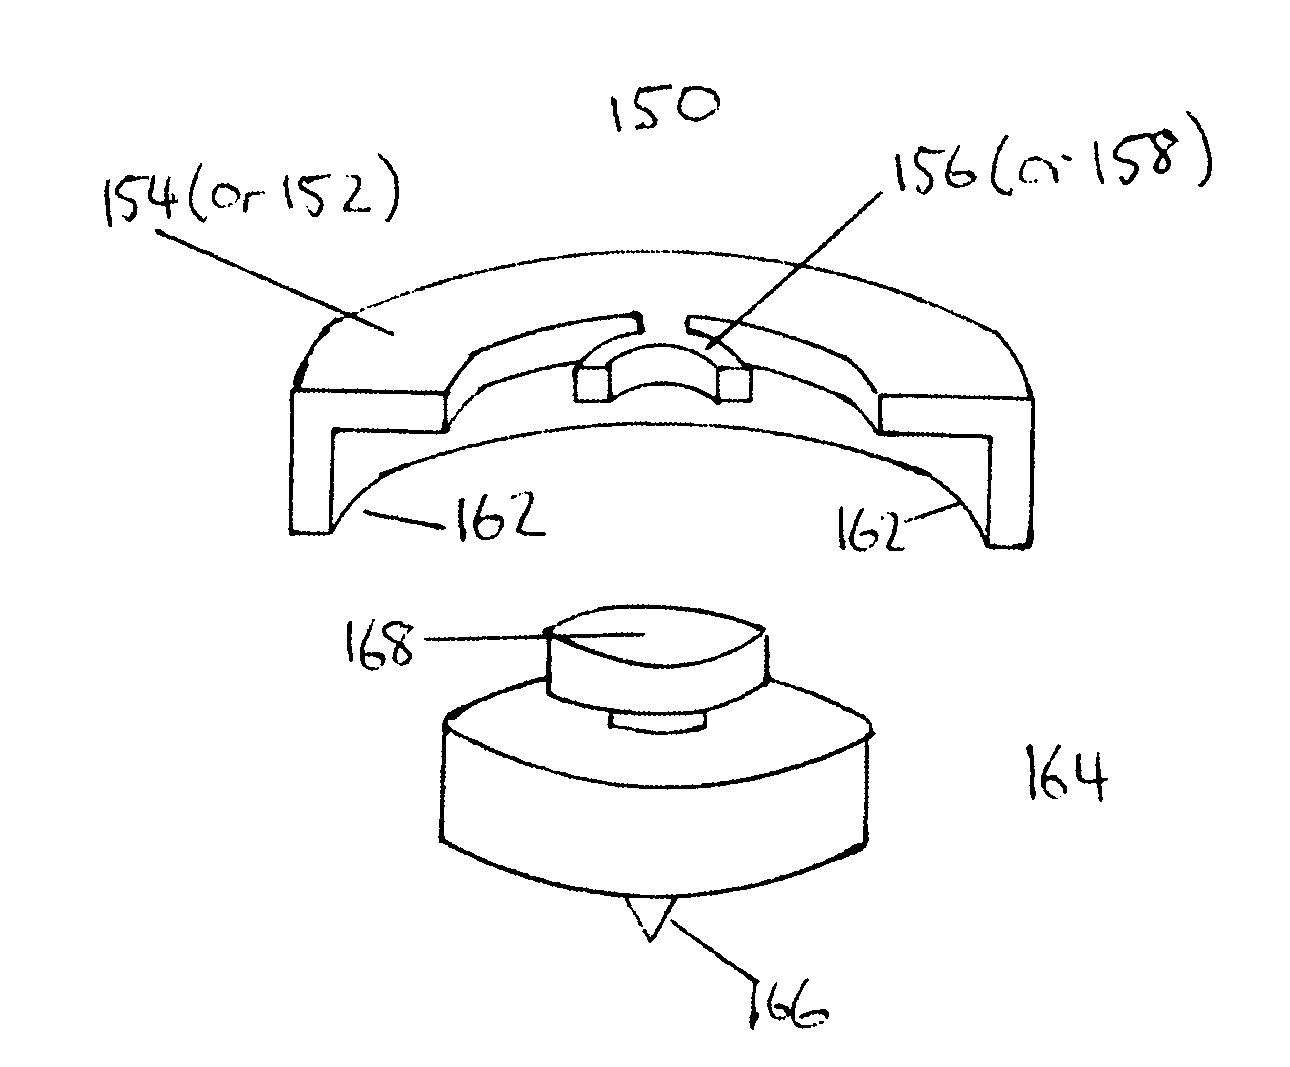 Implant designs, apparatus and methods for total knee resurfacing